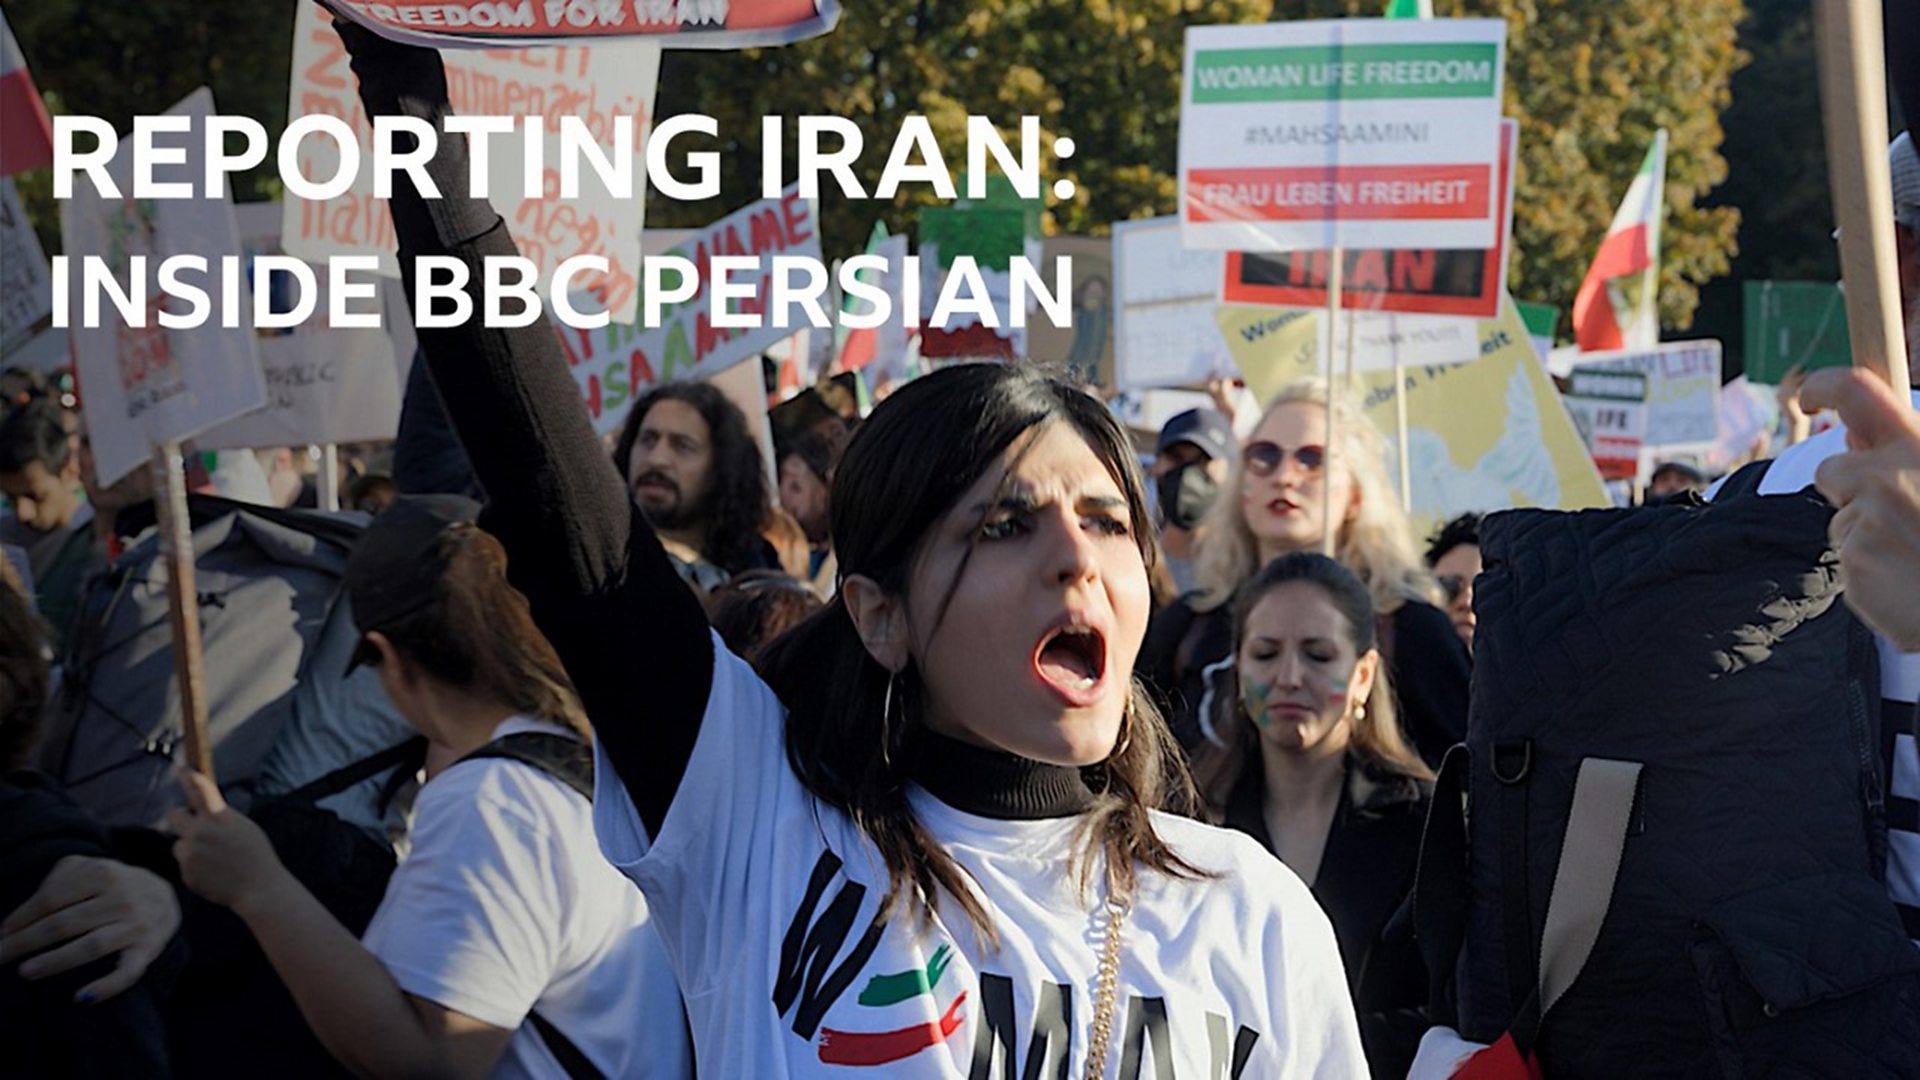 Reporting Iran Inside BBC Persian A new documentary offers a candid